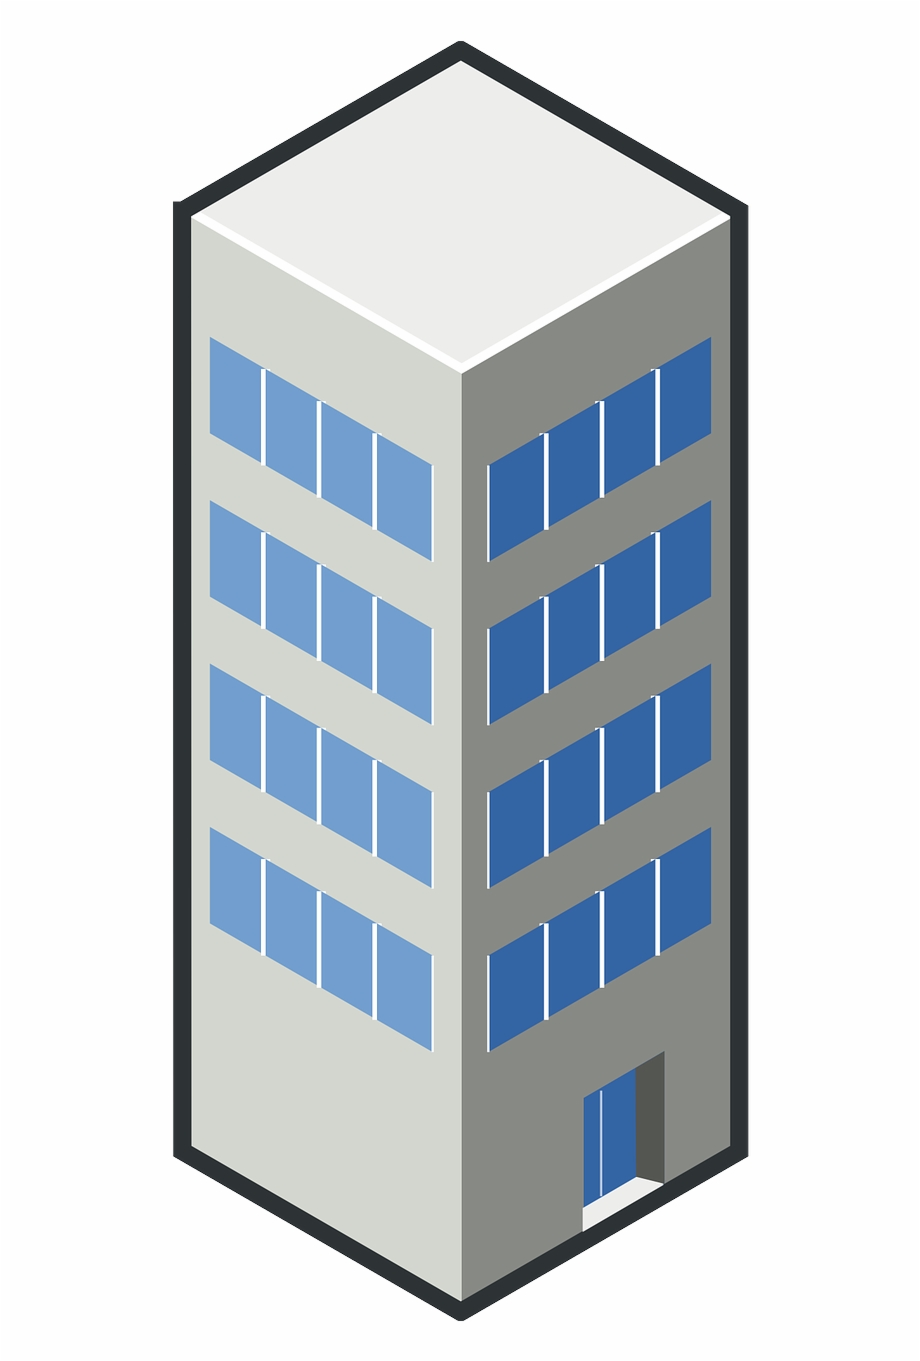 Gedung Png, Transparent Png Download For Free #5118133.